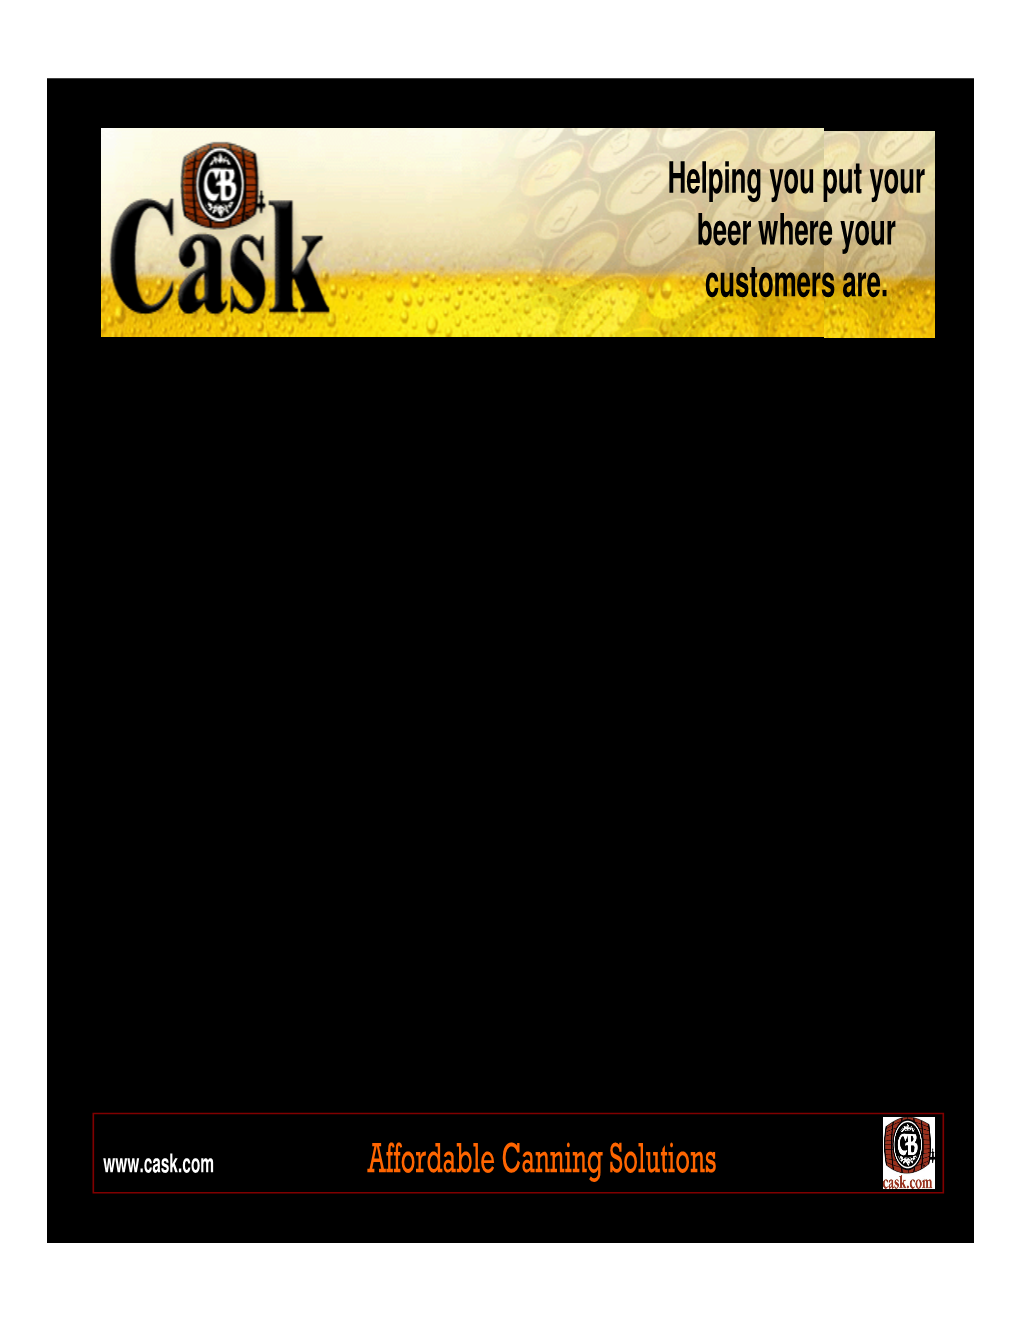 Welcome to Cask Brewing Systems